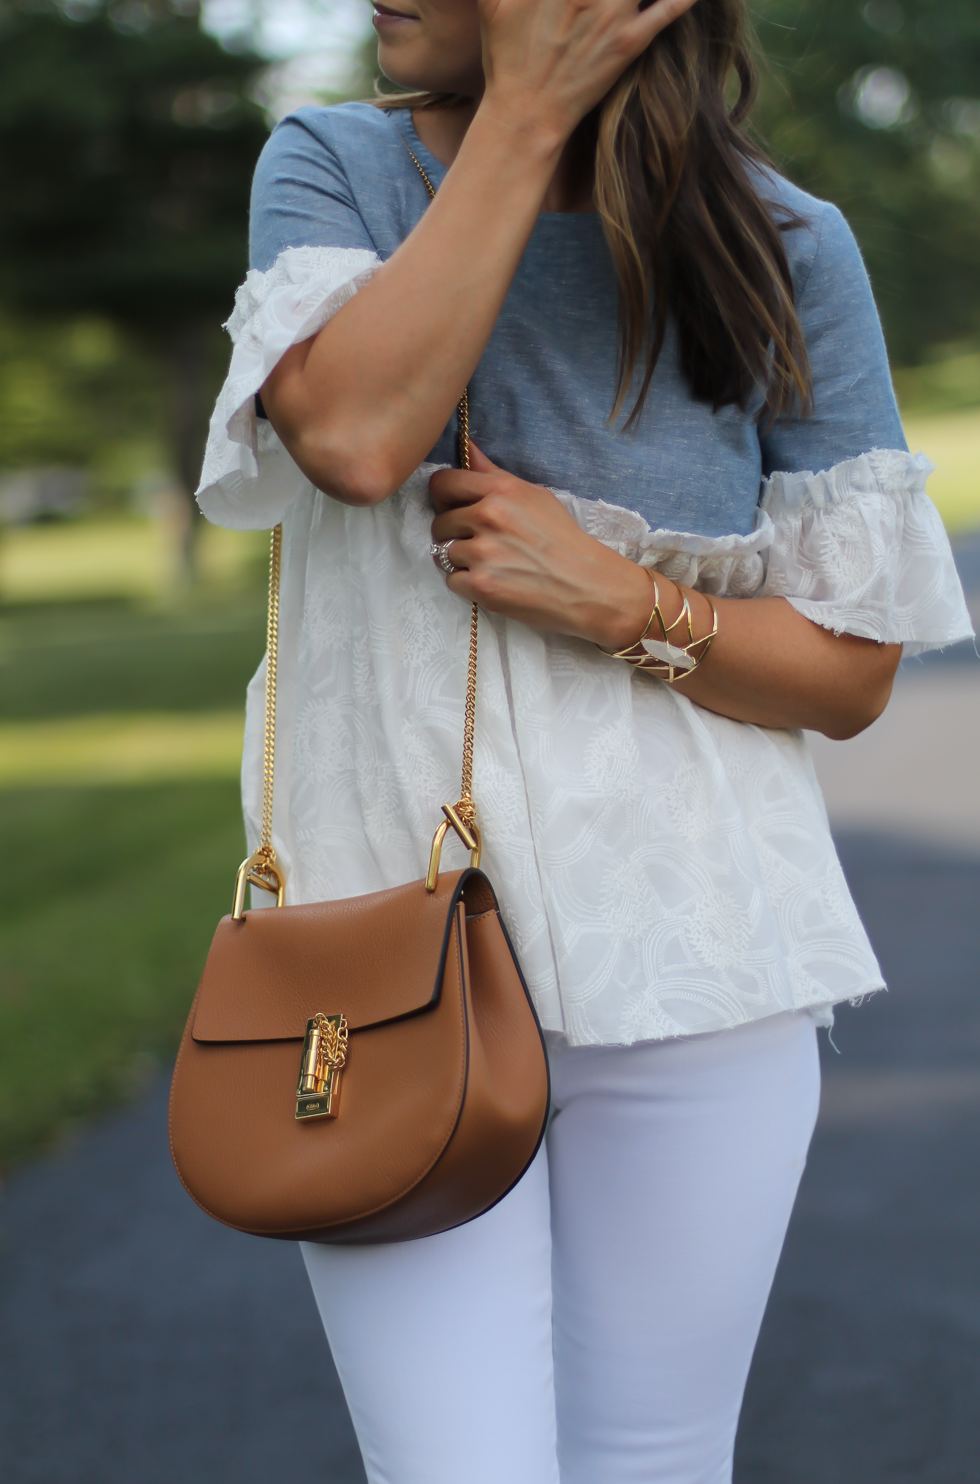 Chambray Ivory Blouse, White Skinny Crop Jeans, Tan Leather Espadrille Flats, Tan Chain Strap Crossbody, Anthropologie, J.Brand, Soludos, Chloe 13